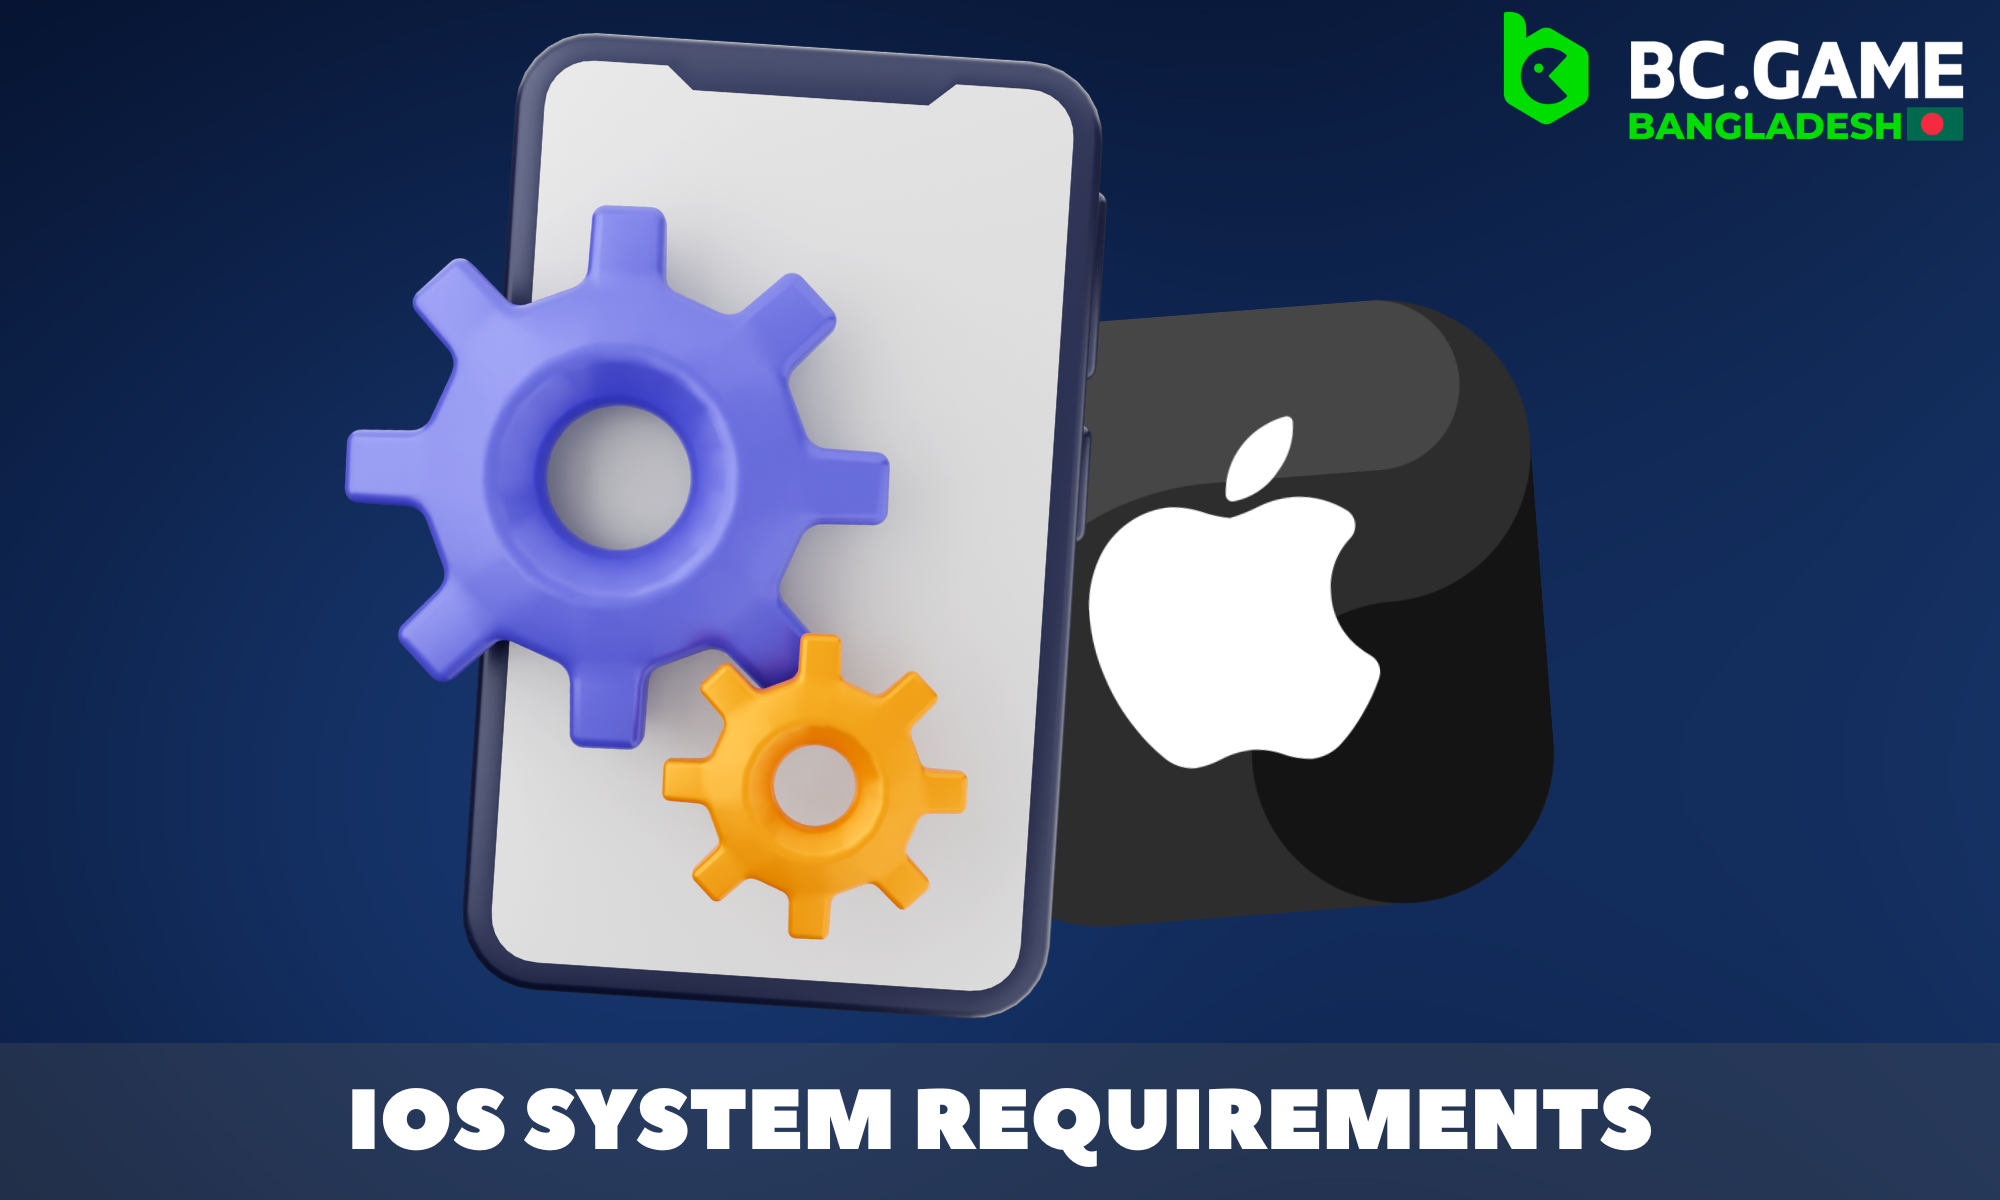 Overview of BC Game system requirements for IOS devices